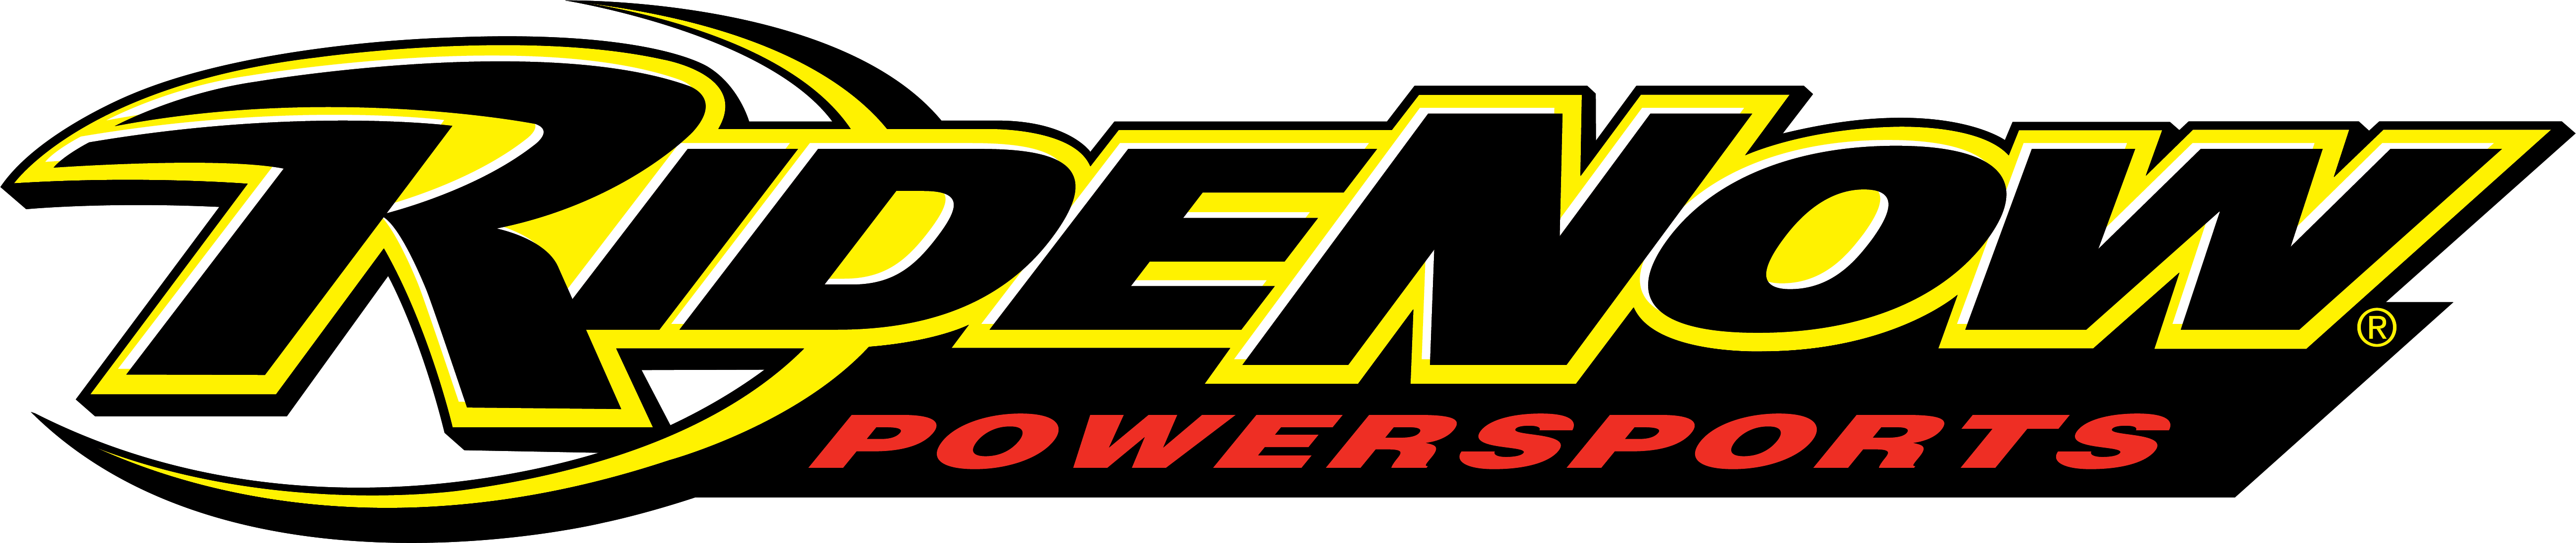 Read Now, Ride Later, The RideNow Powersports Blog.